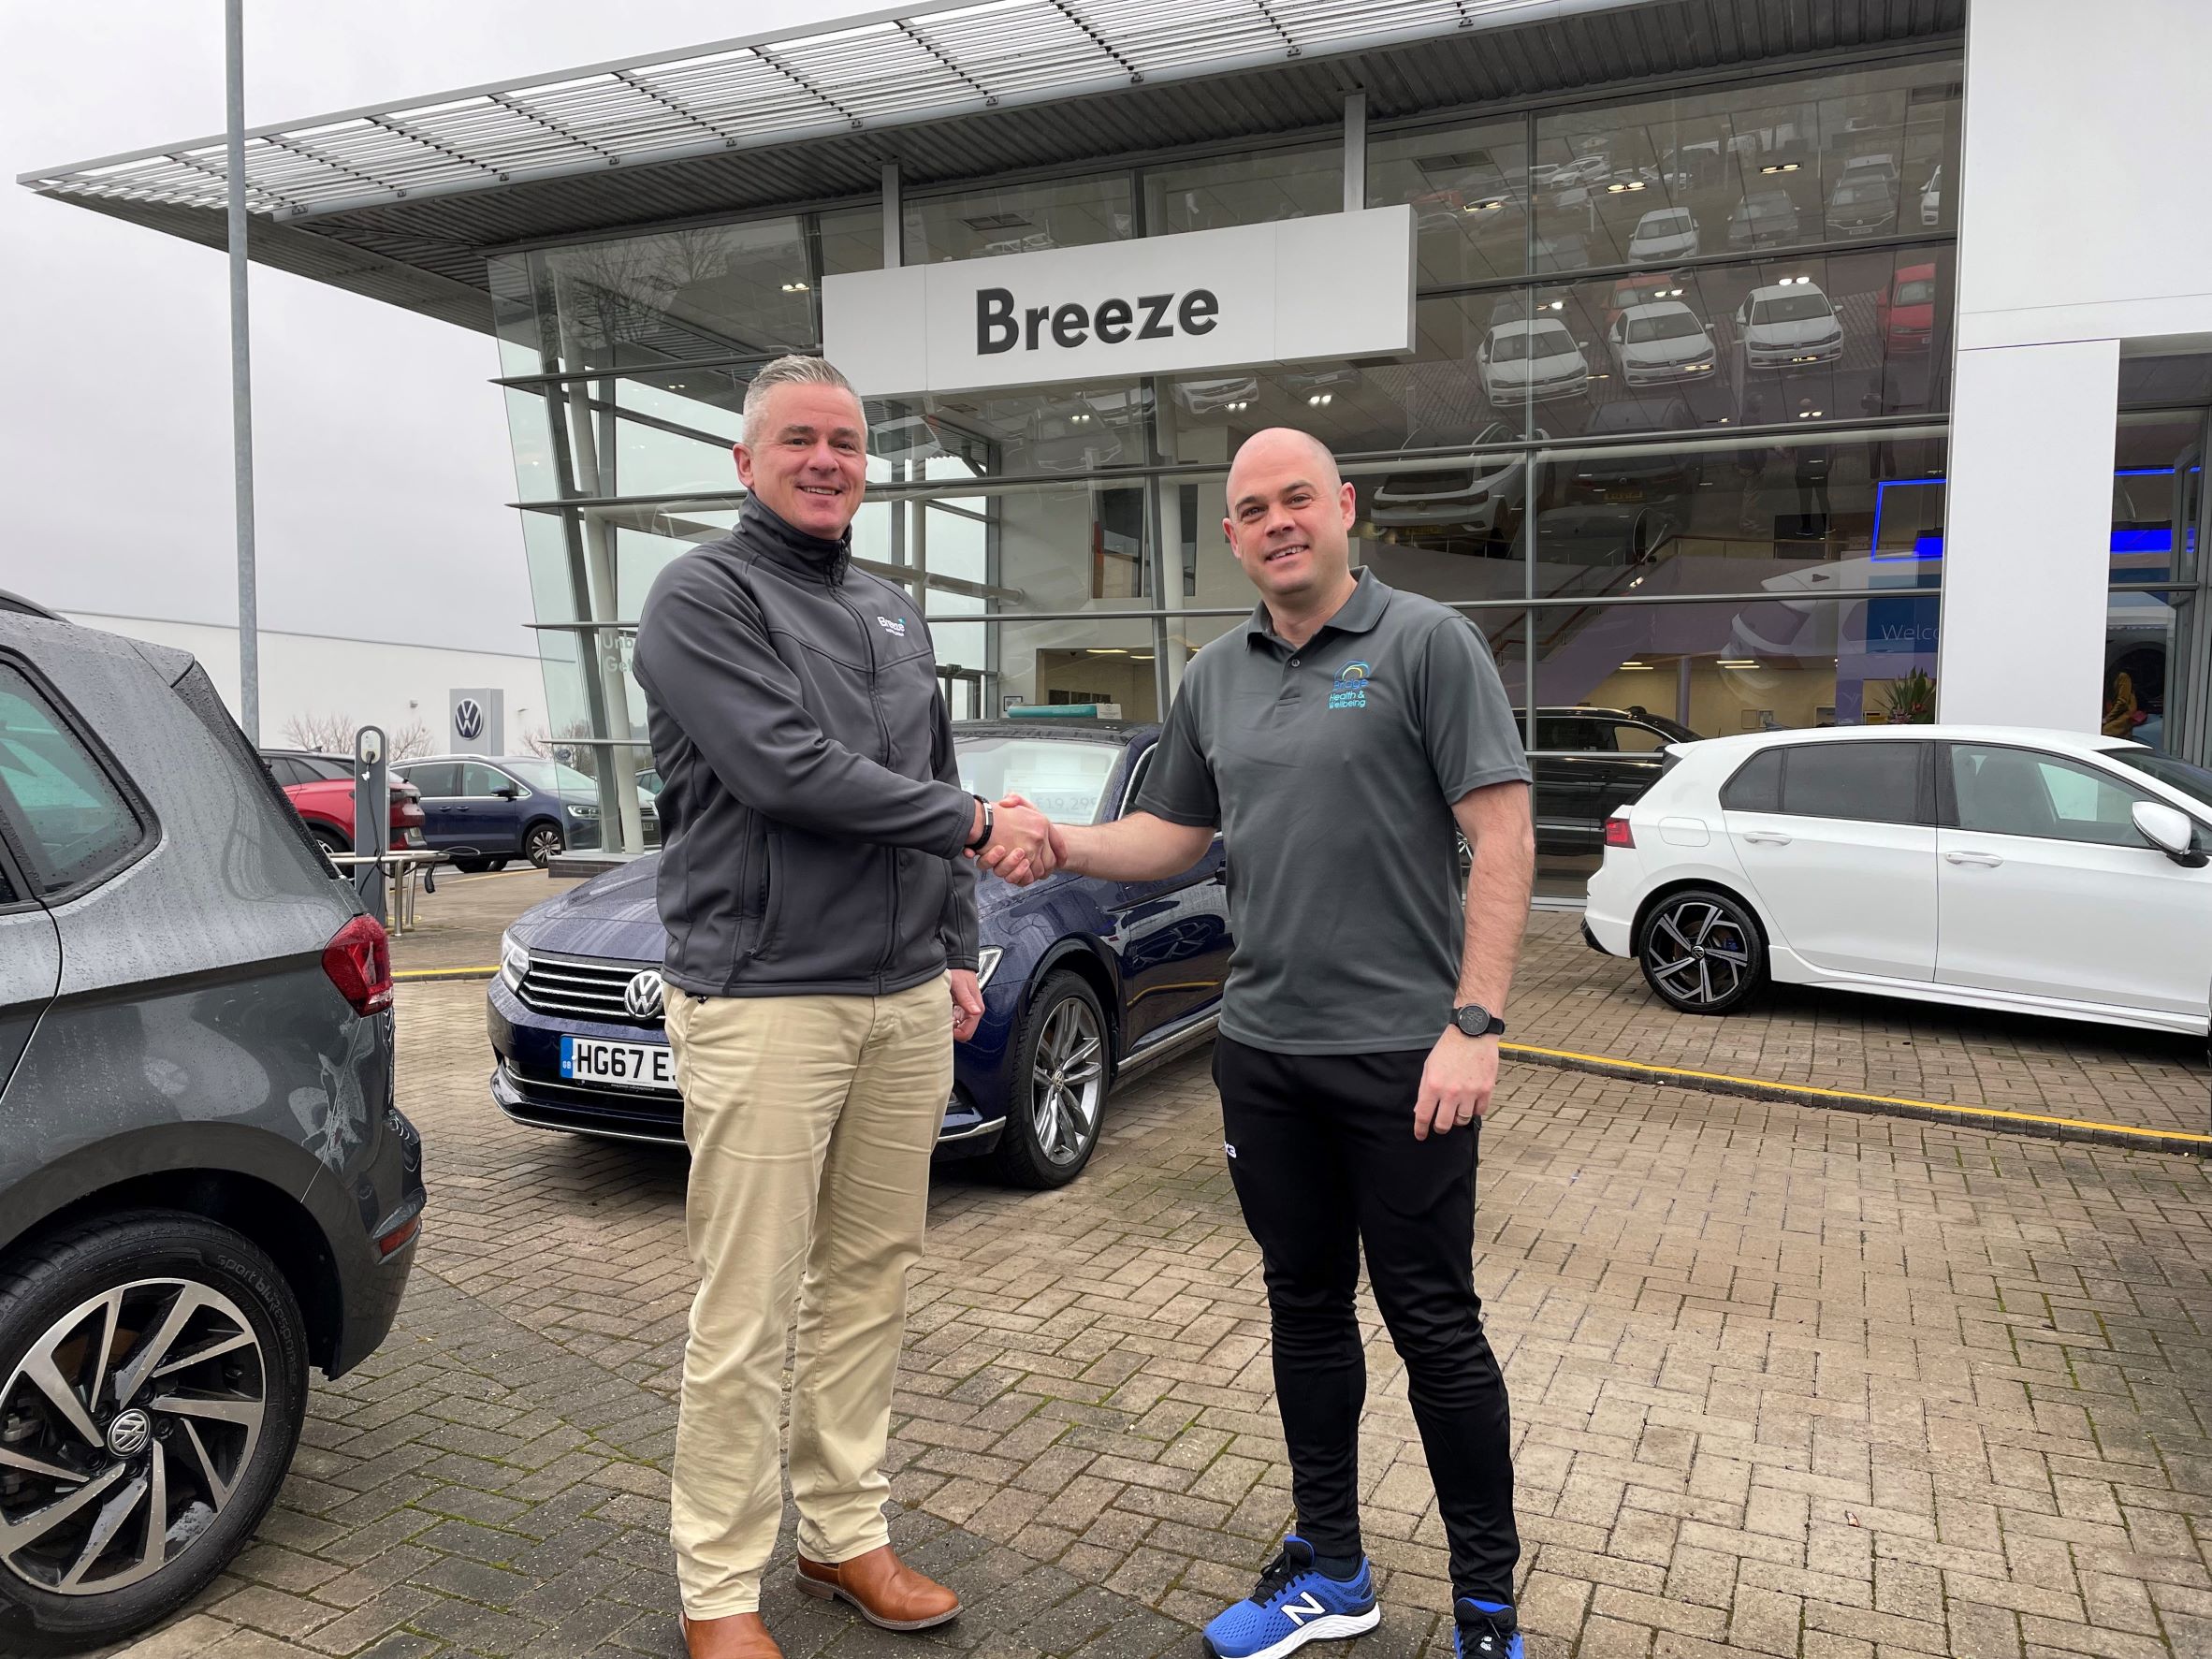 Mark Langford of Breeze Motor Group and Paul OConnell of Bridge Health and Wellbeing shaking hands 2 lr